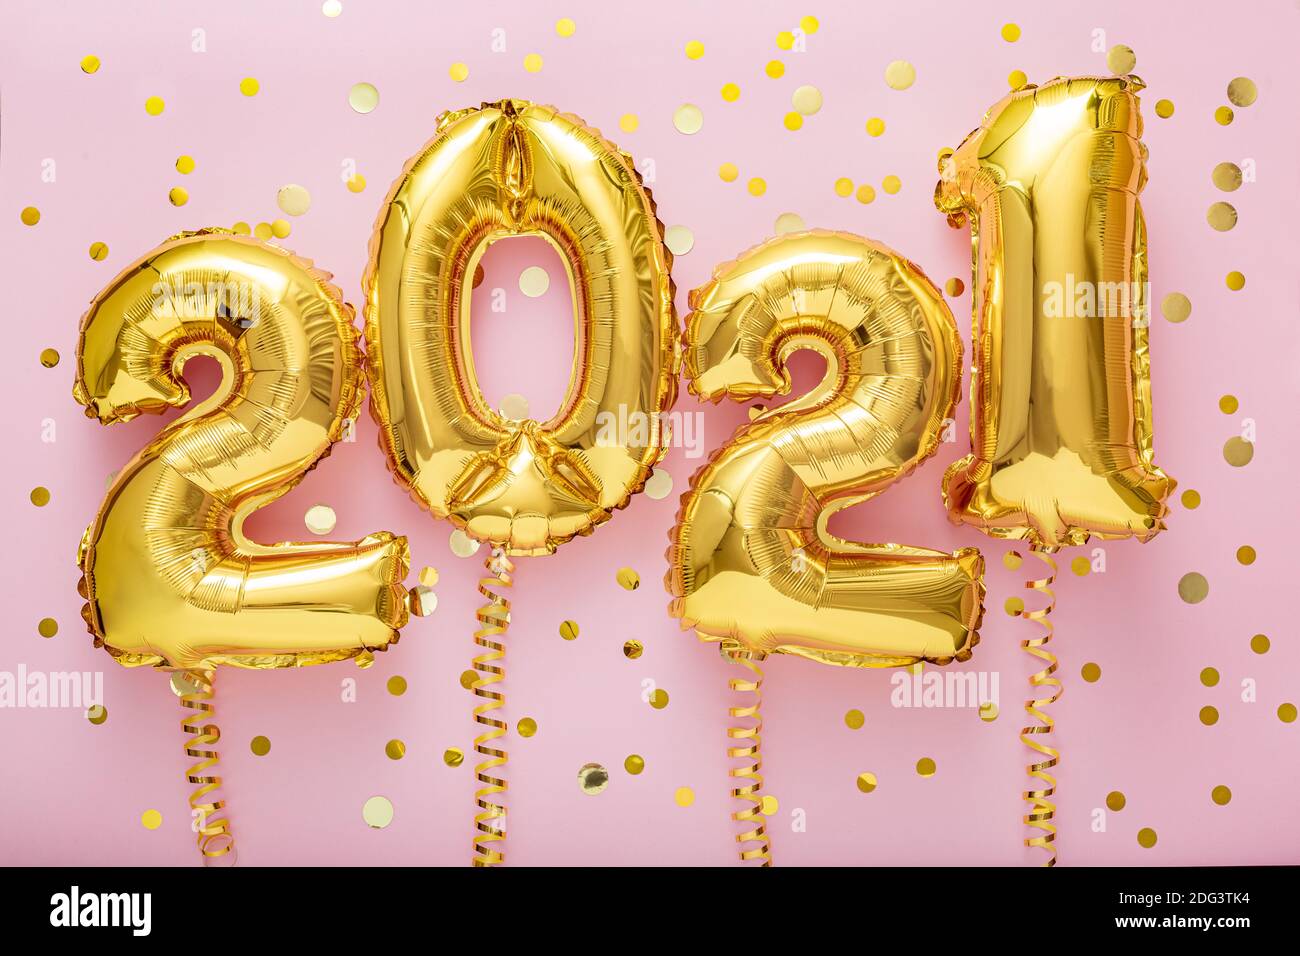 2021 air balloon gold numbers with ribbons golden confetti on pink background, Christmas, Happy New year eve decor with gold foil balloons 2021 Stock Photo